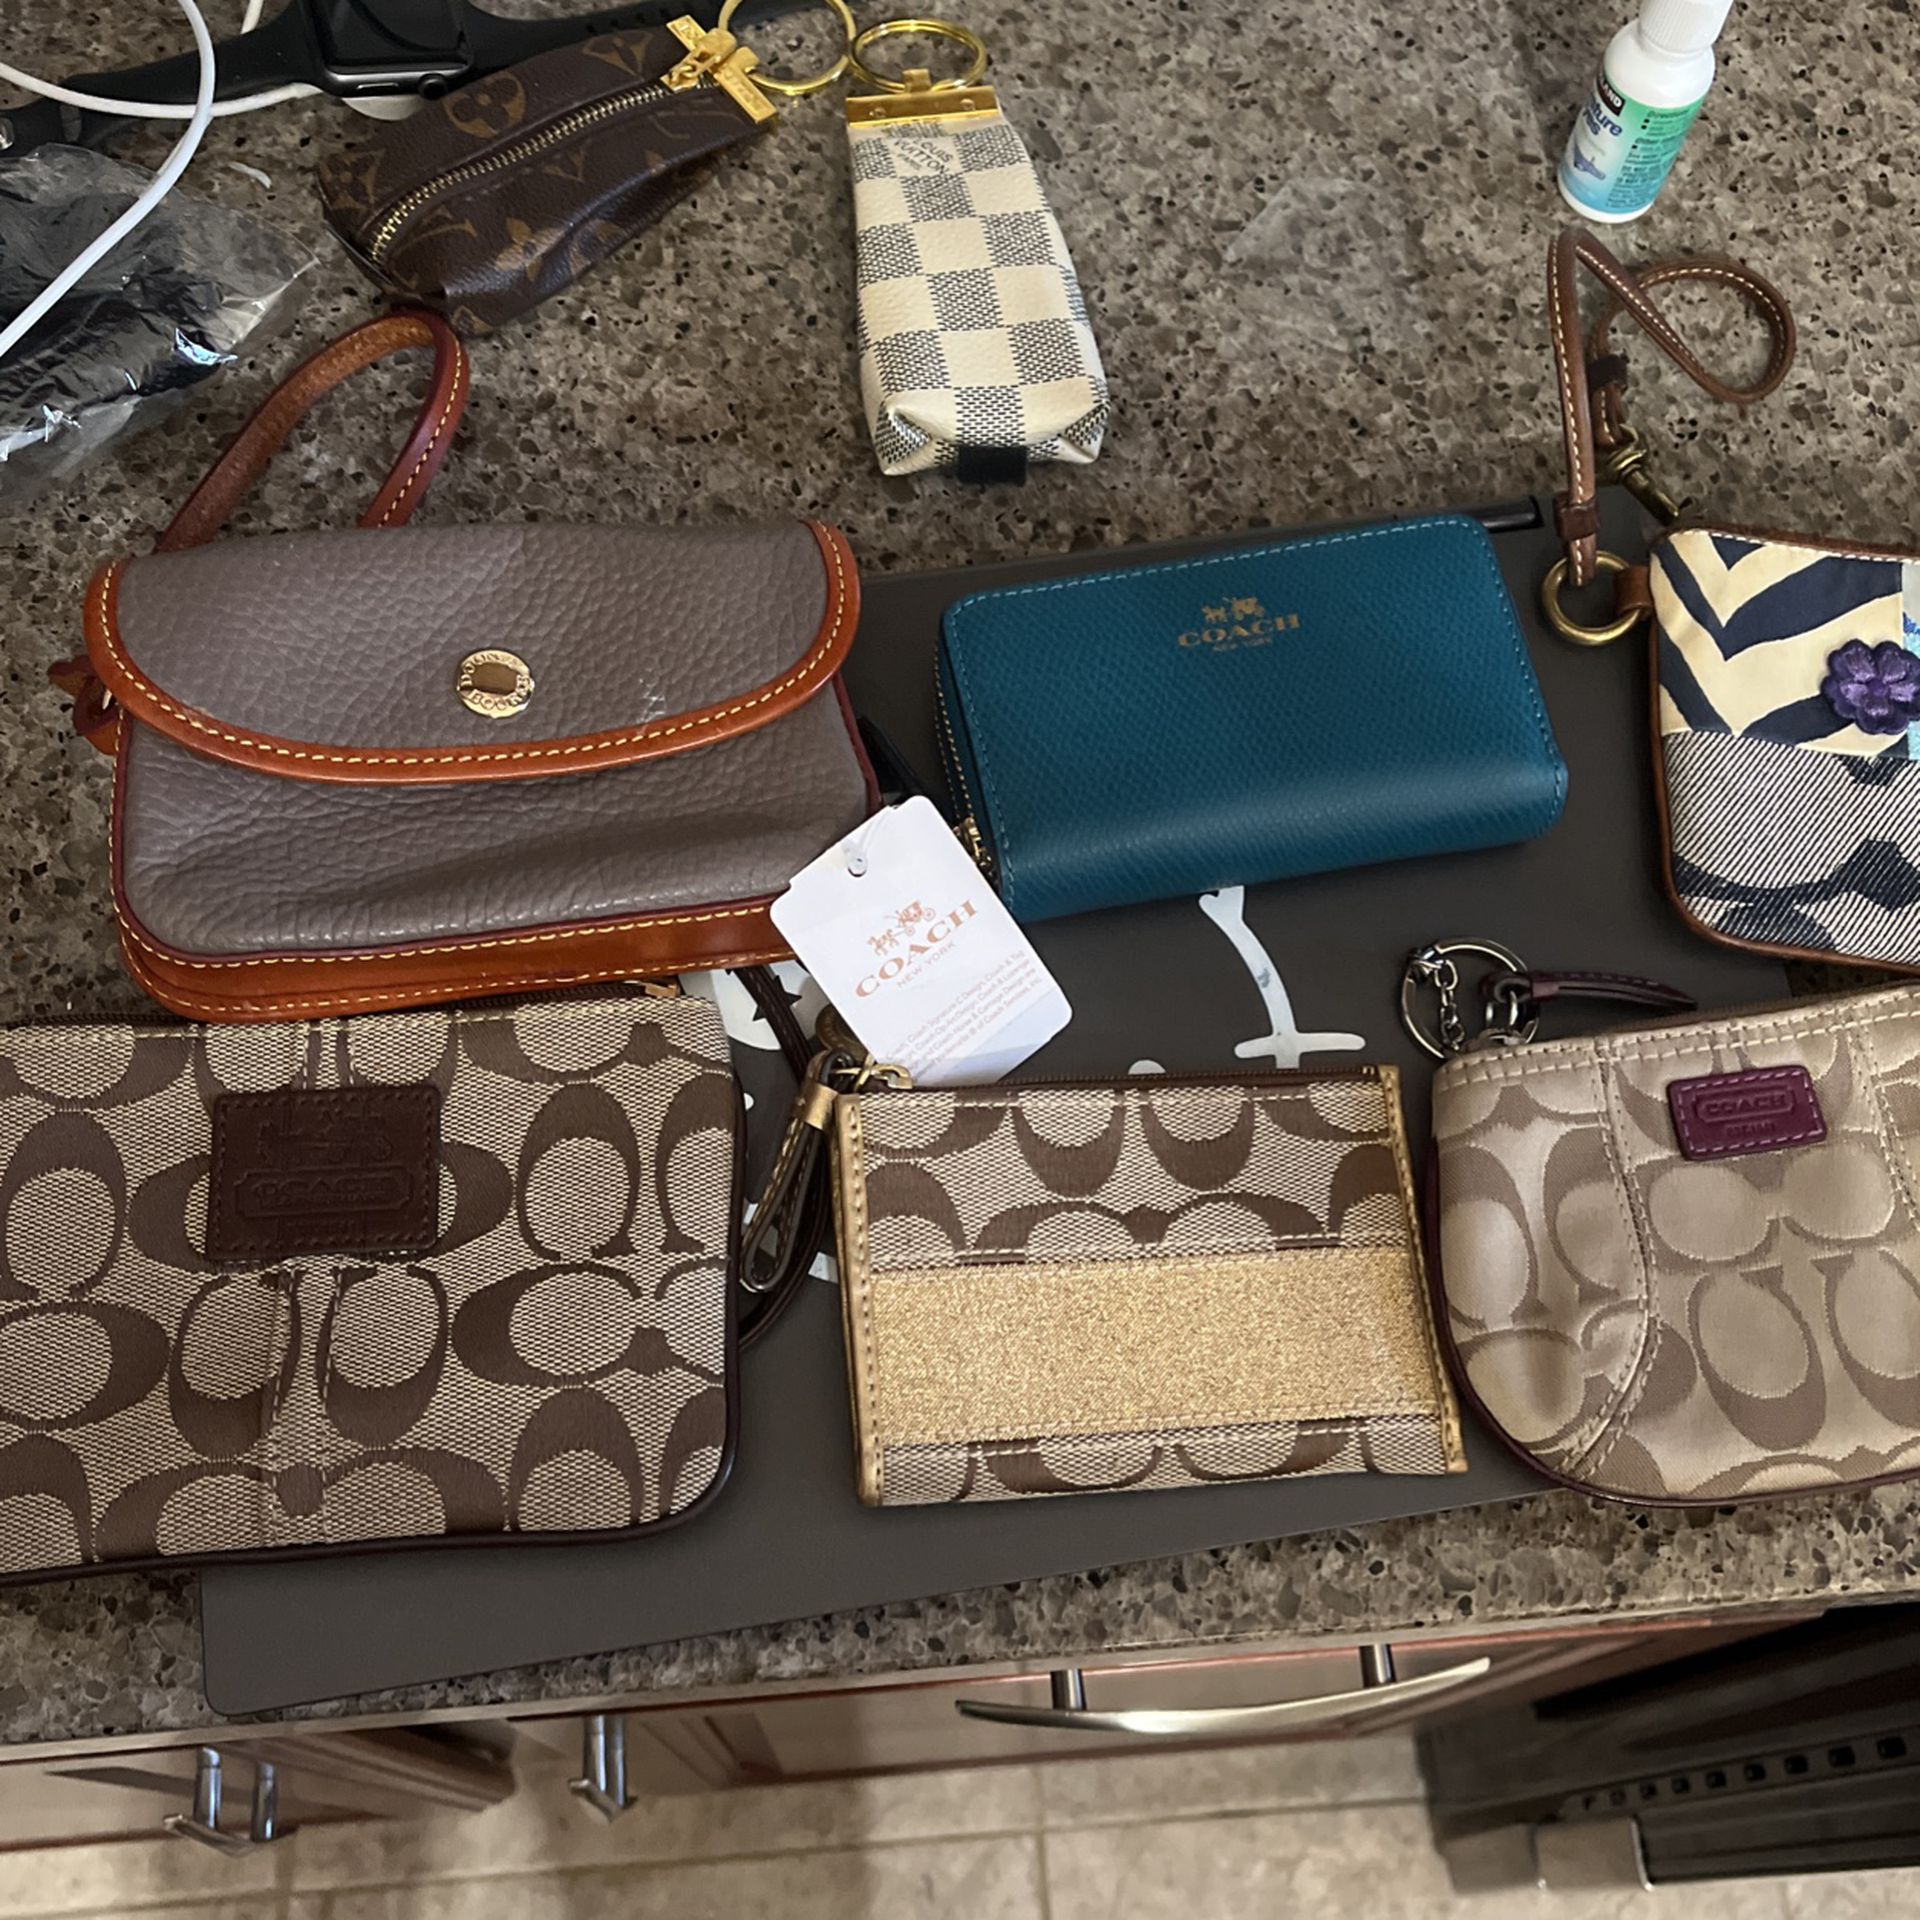 Coach Wallet For Sale all Brand New